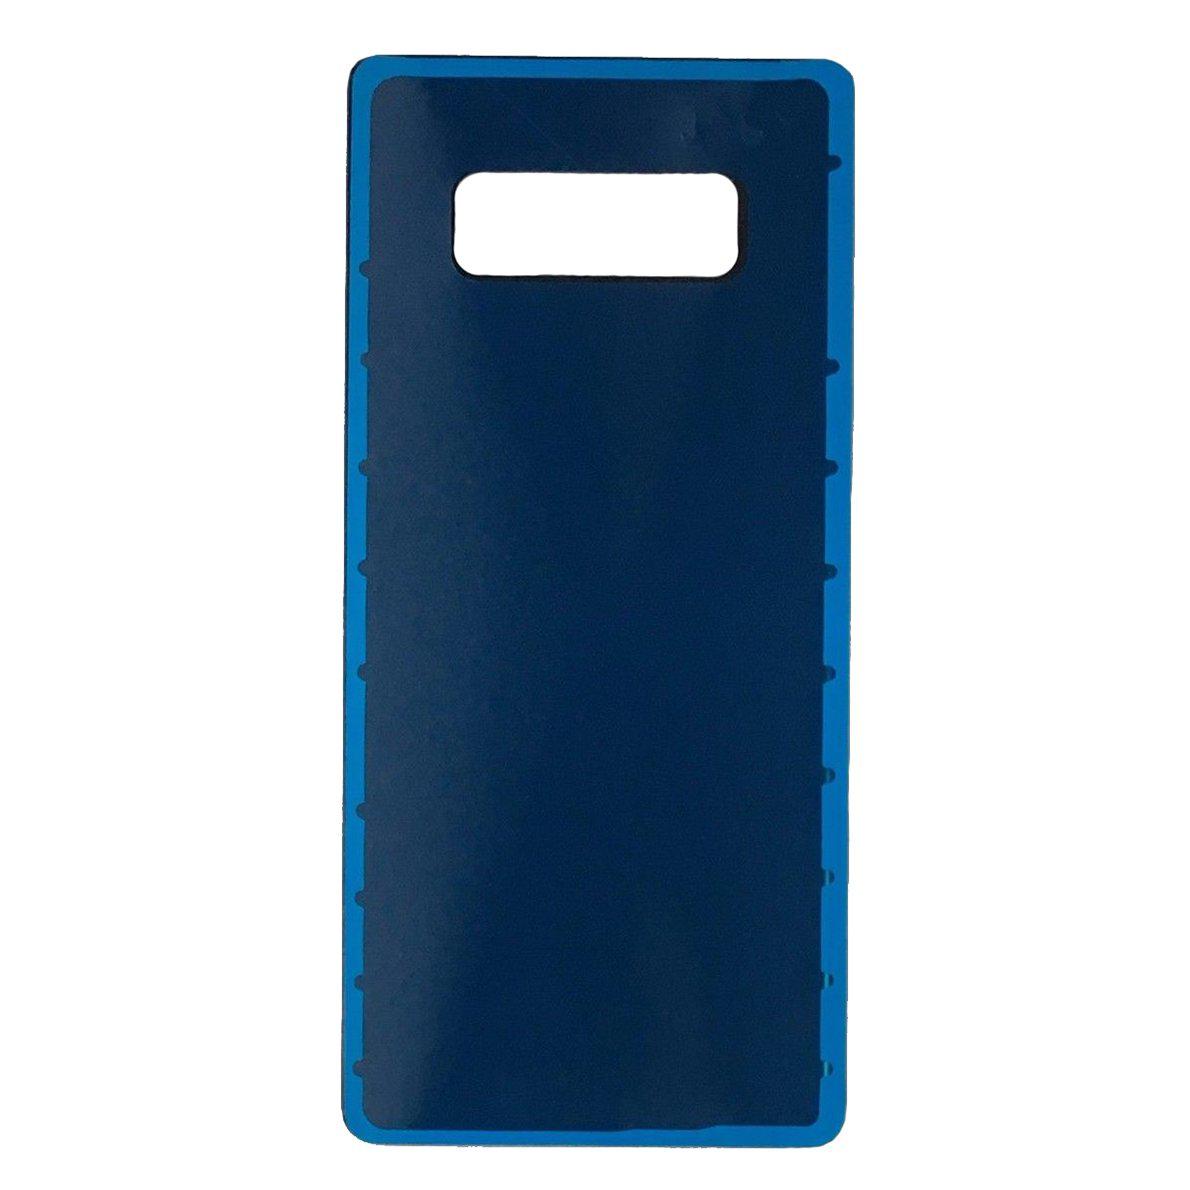 Samsung Galaxy Note 8 Battery Cover Rear Glass Panel With Adhesive - Blue for [product_price] - First Help Tech